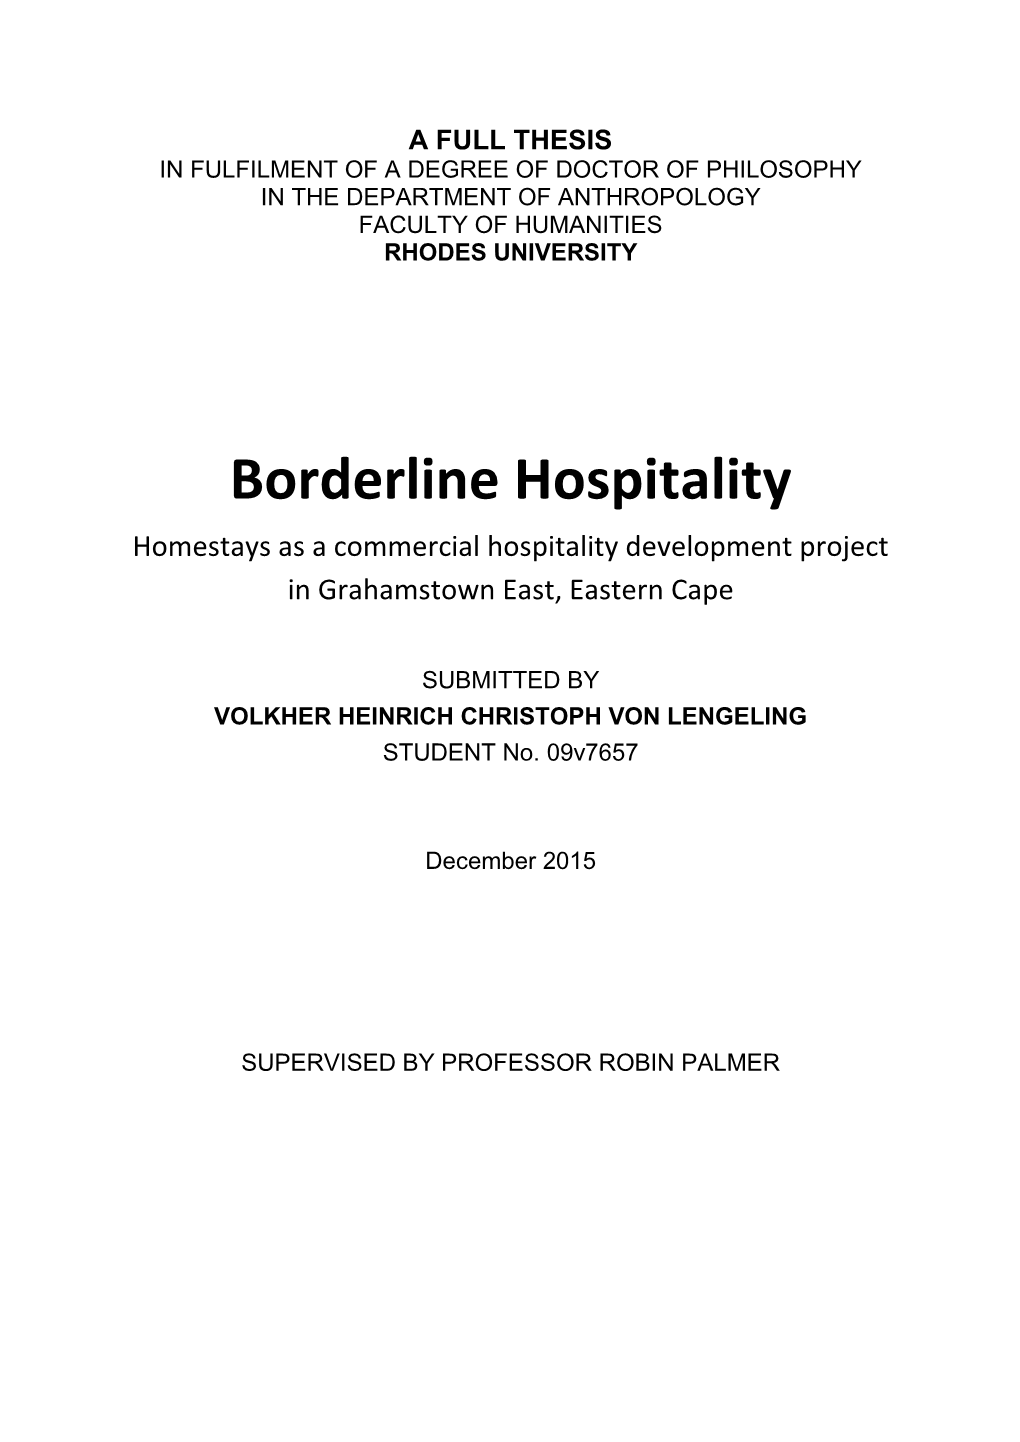 Borderline Hospitality Homestays As a Commercial Hospitality Development Project in Grahamstown East, Eastern Cape